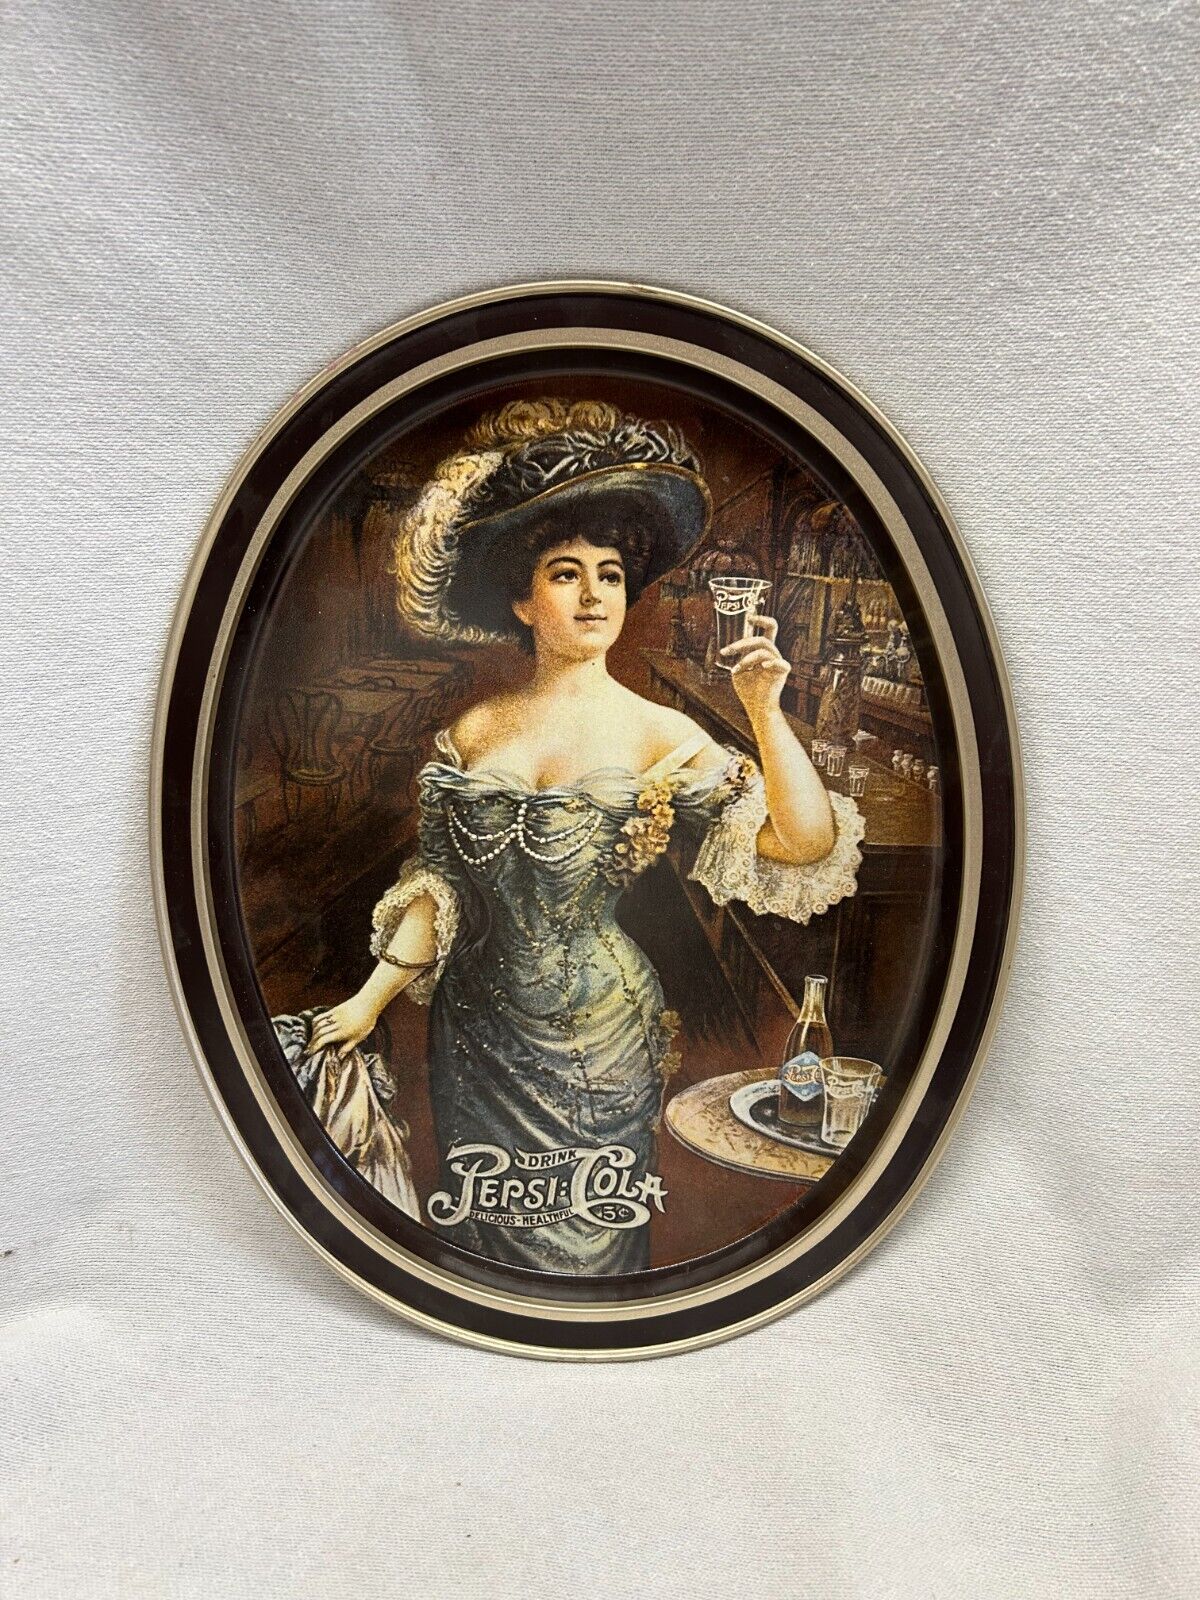 VINTAGE 1970\'s DRINK PEPSI-COLA GIBSON GIRL SERVING TRAY